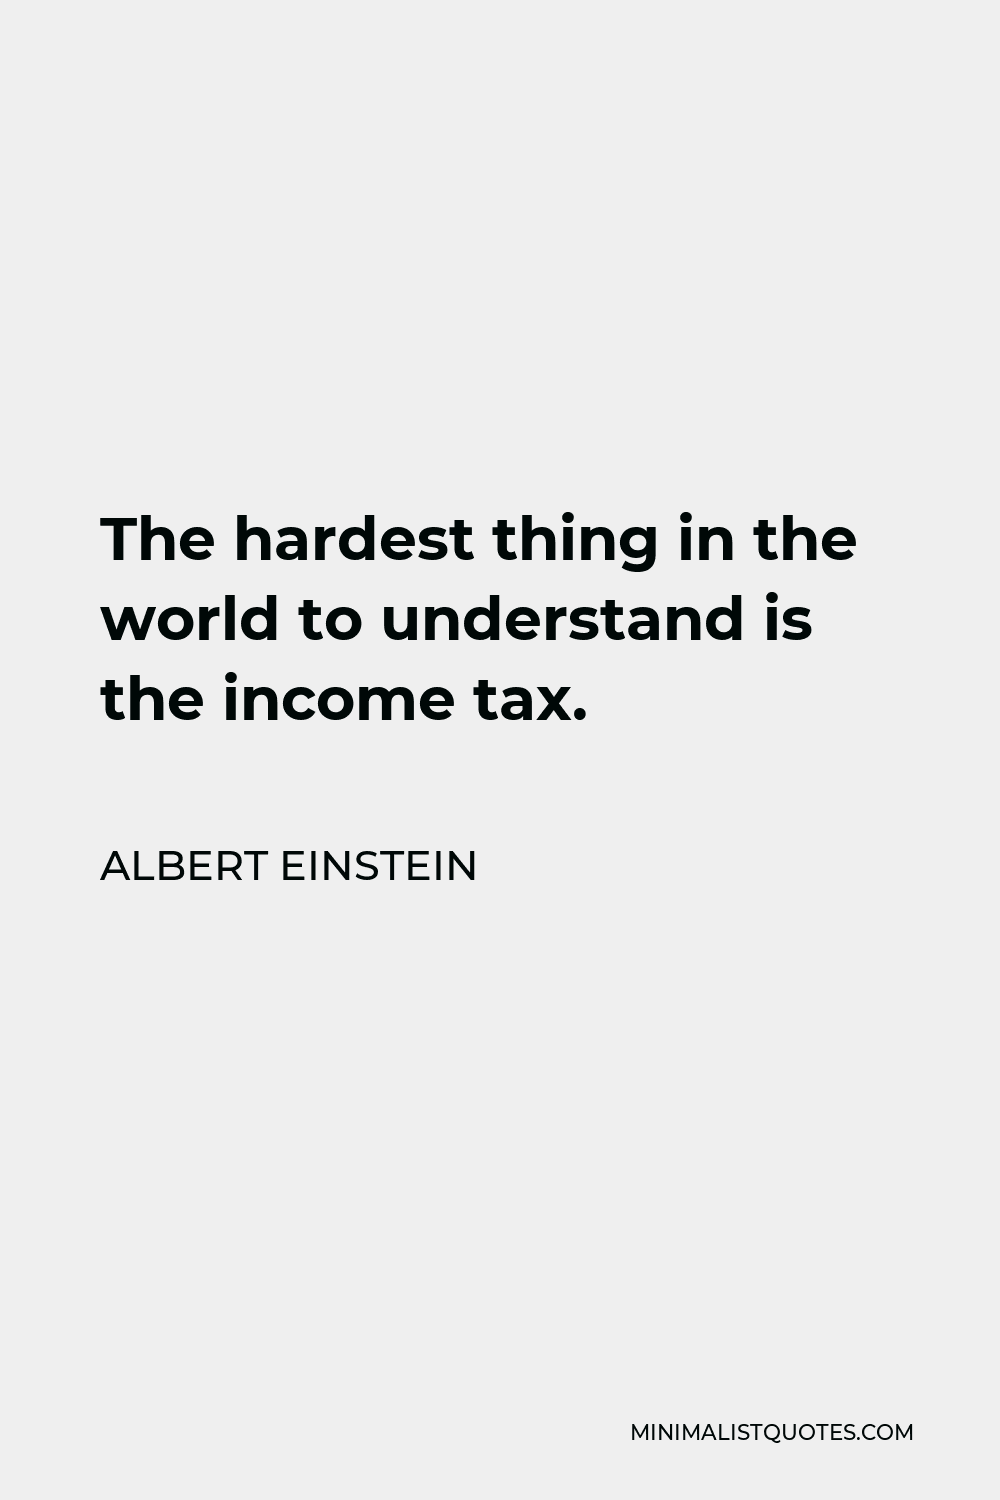 Albert Einstein Quote - The hardest thing in the world to understand is the income tax.